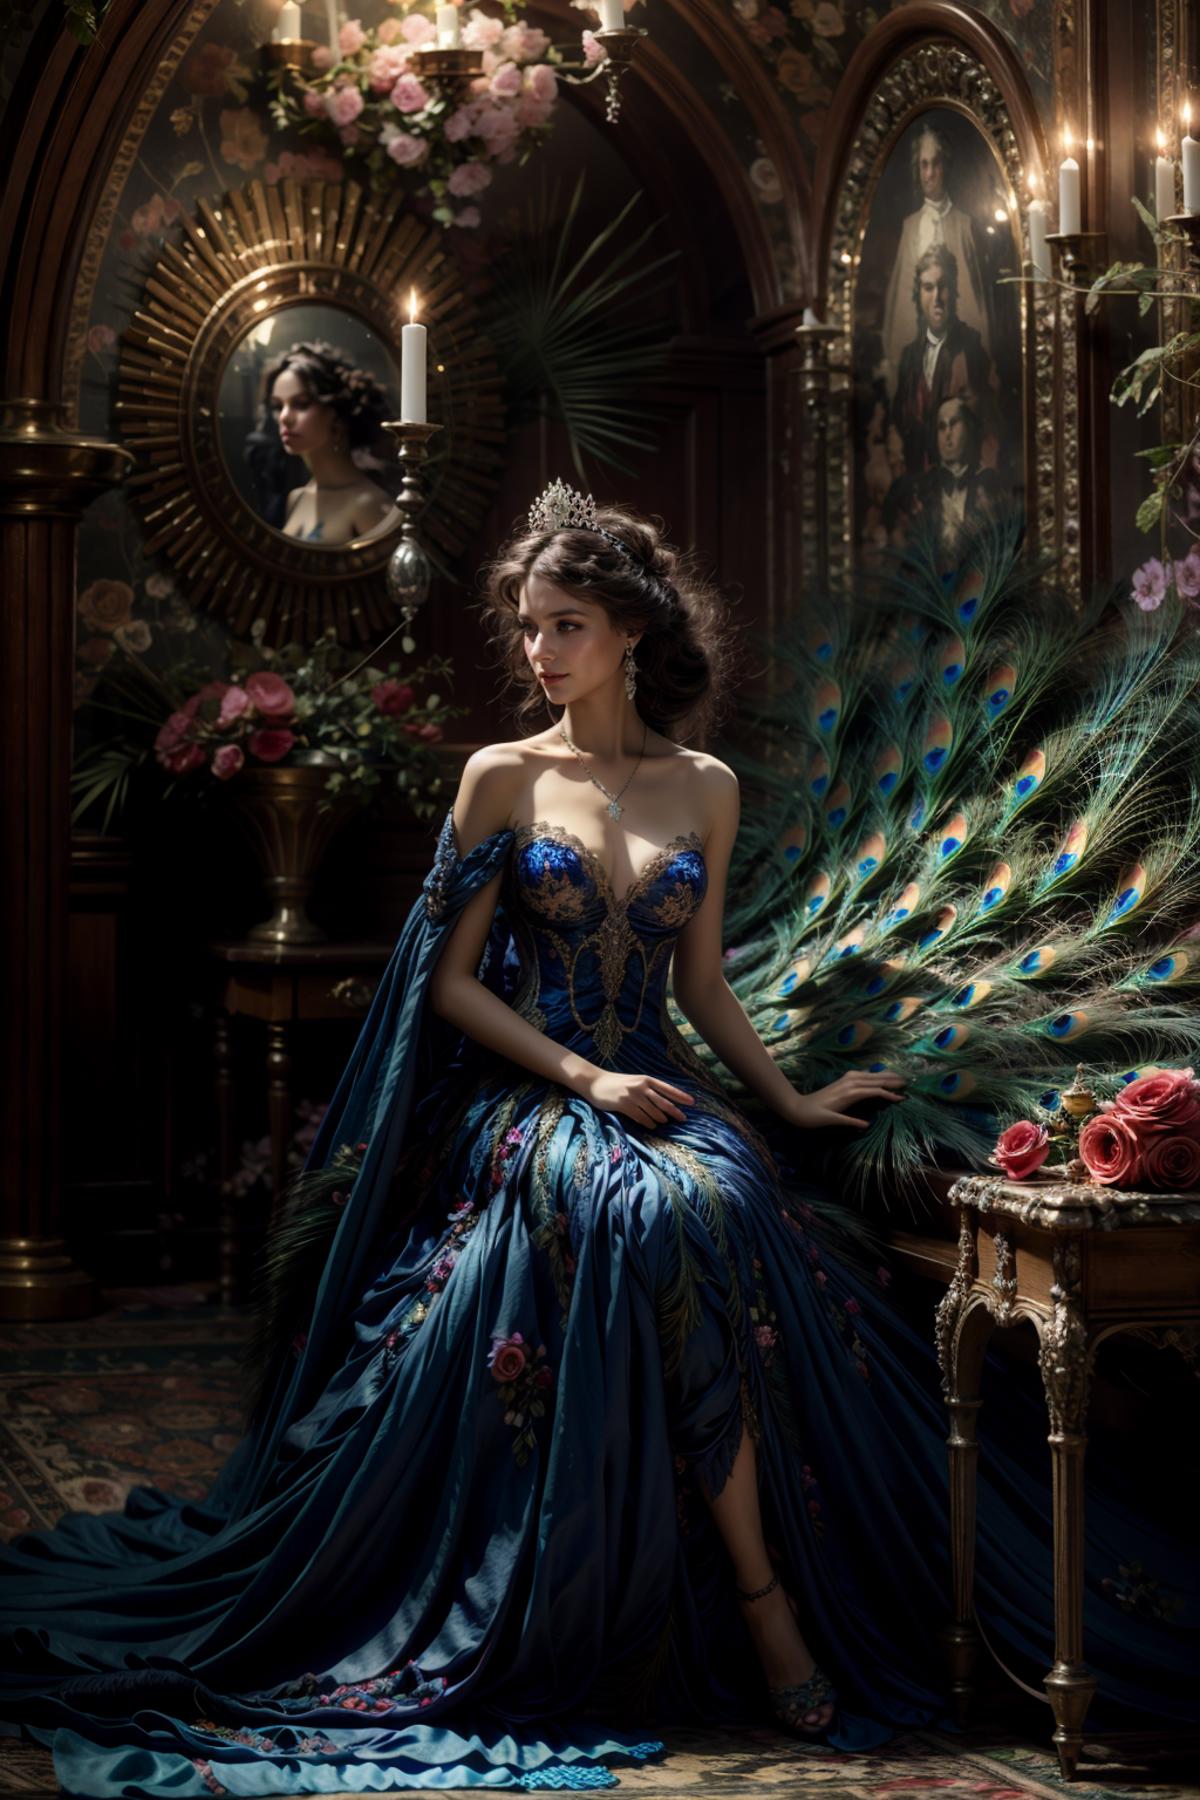 A young woman in a blue dress and peacock feather fan, sitting in front of a mirror.